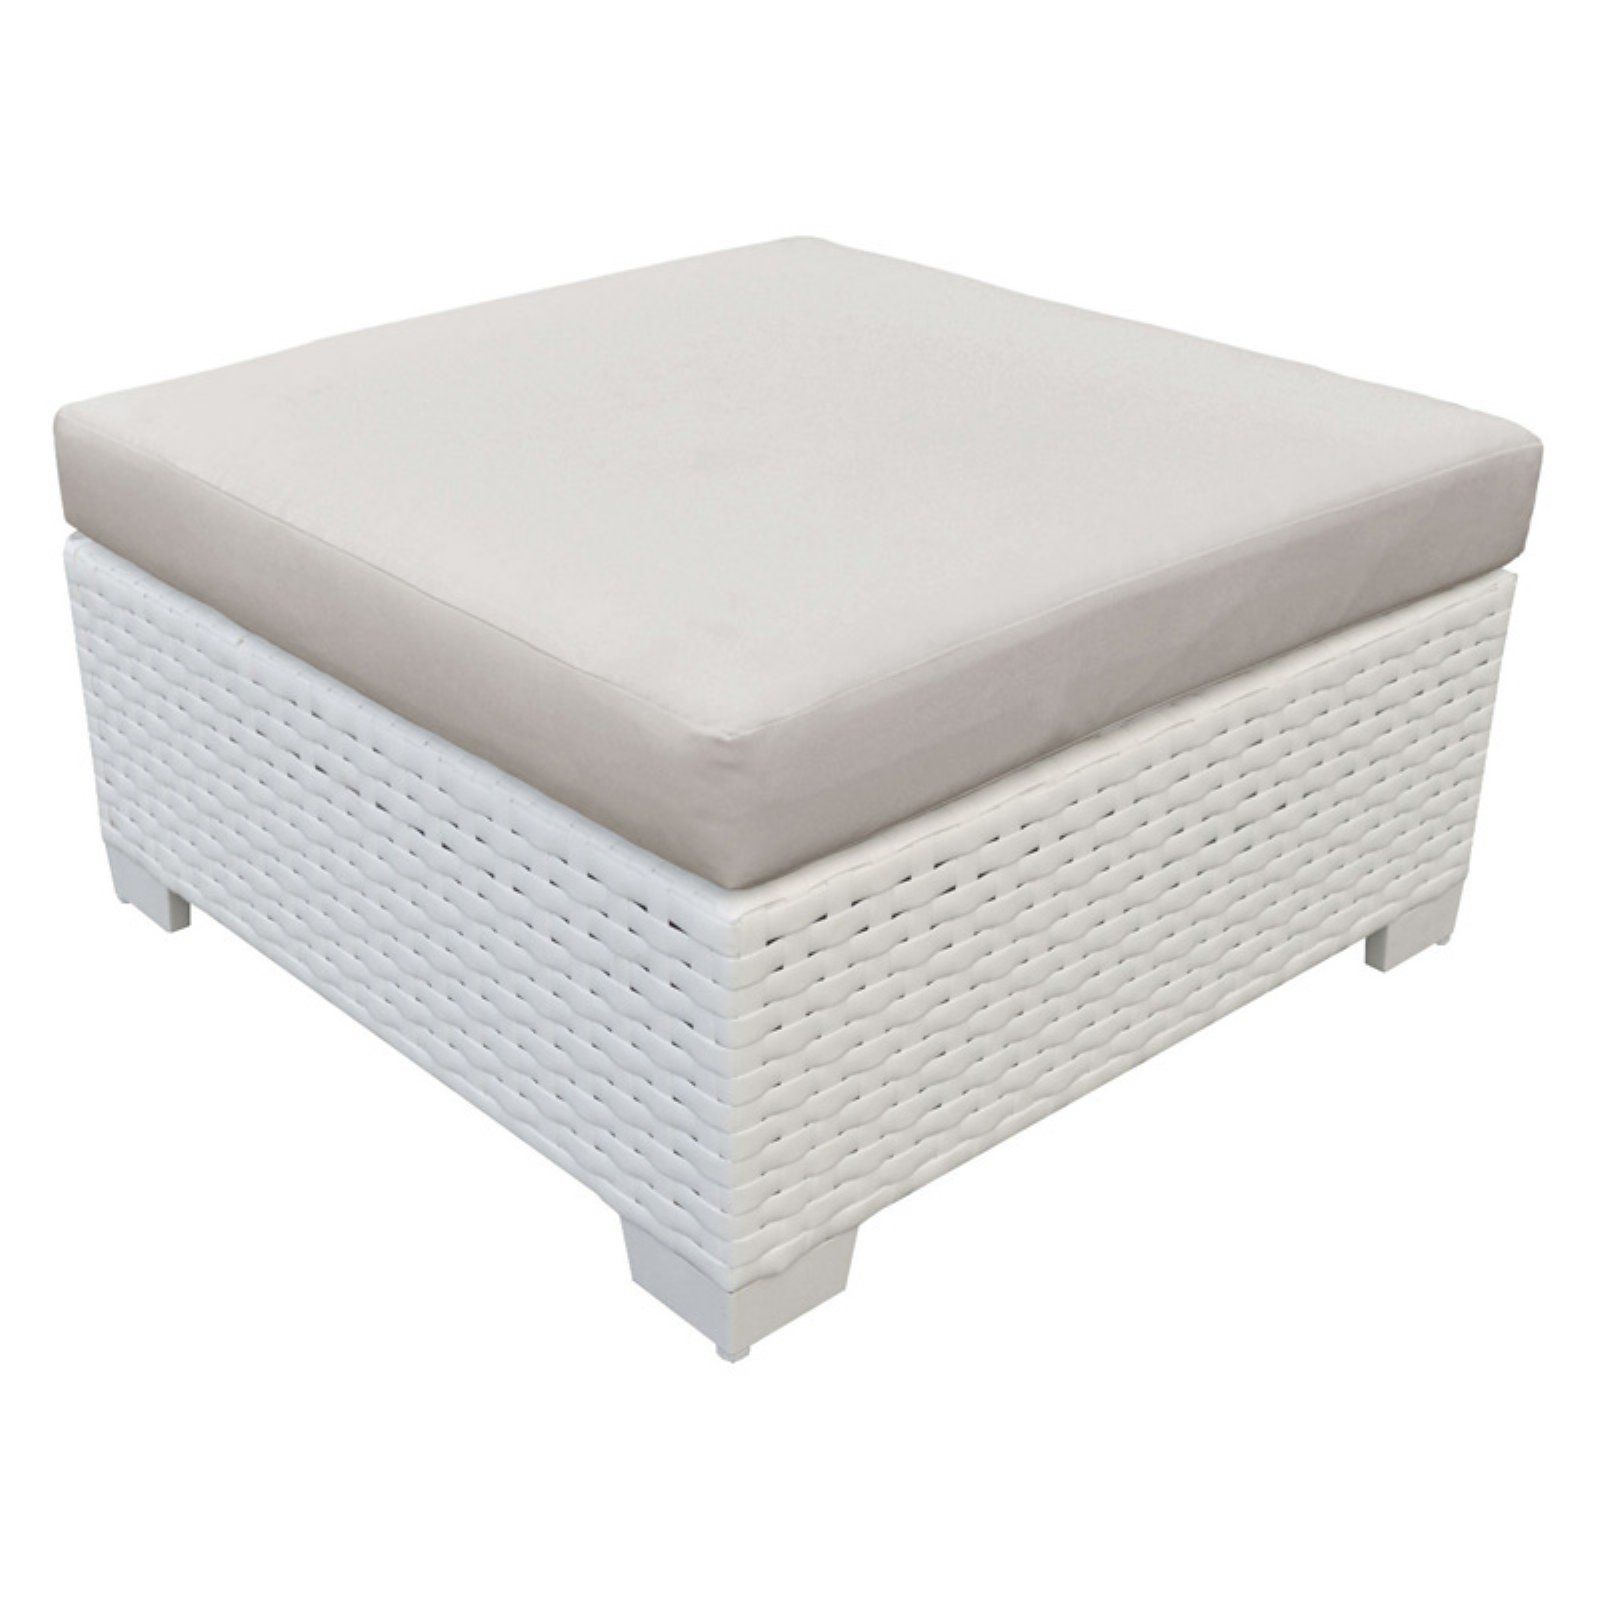 Tk Classics Outdoor White Wicker Ottoman – Walmart With Woven Pouf Ottomans (View 8 of 20)